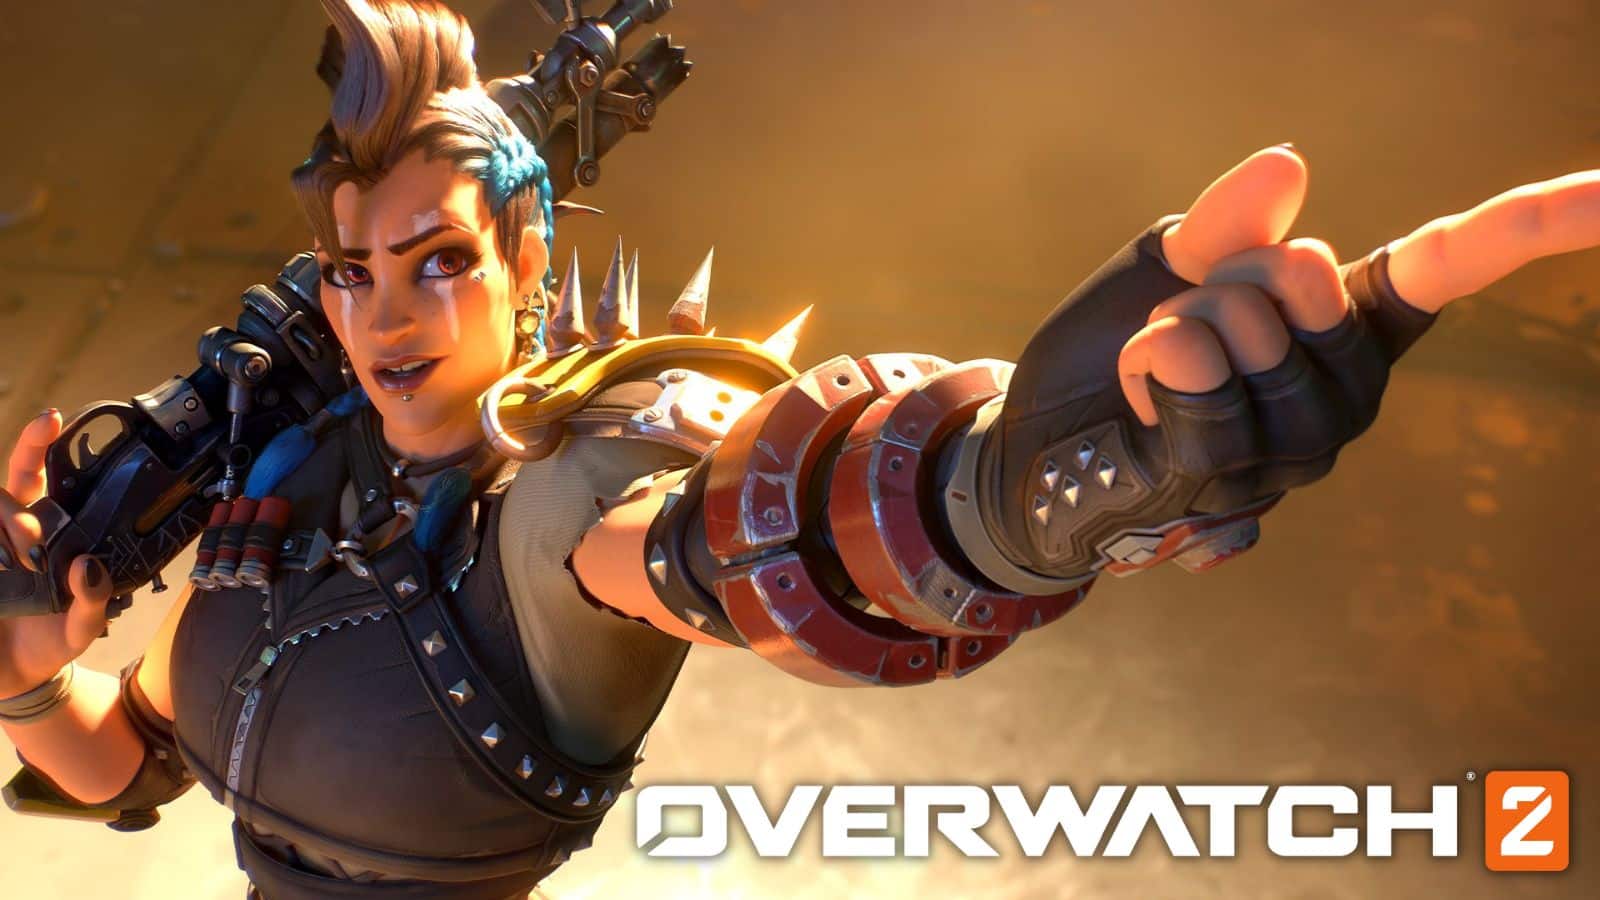 Overwatch 2 developer explains how new voice lines will make heroes feel "alive"